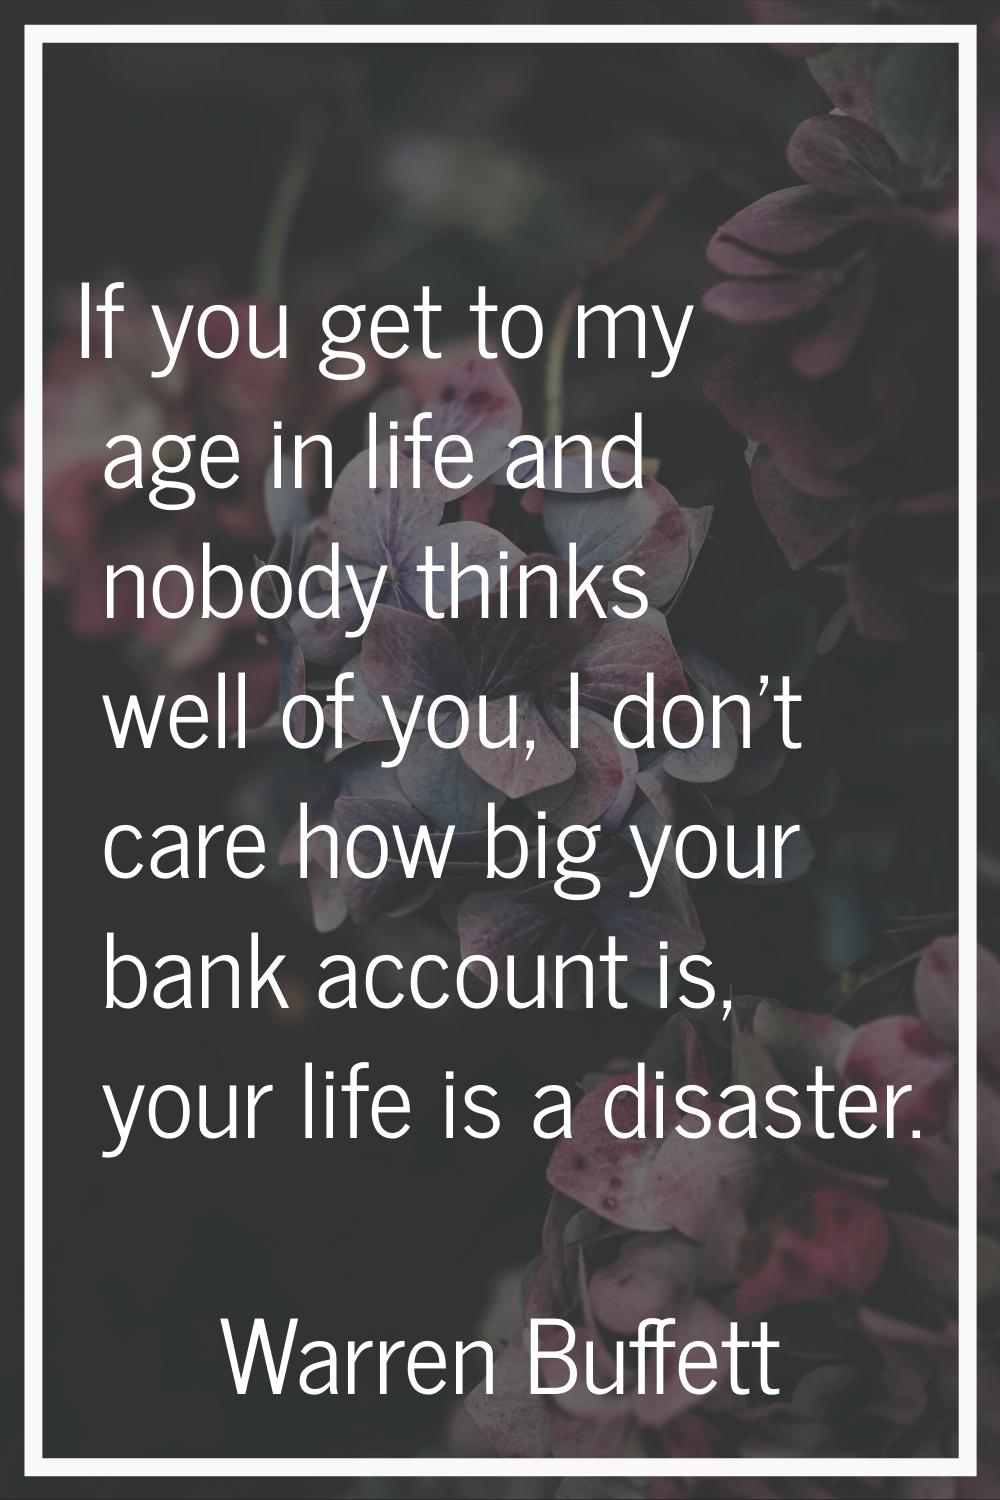 If you get to my age in life and nobody thinks well of you, I don't care how big your bank account 